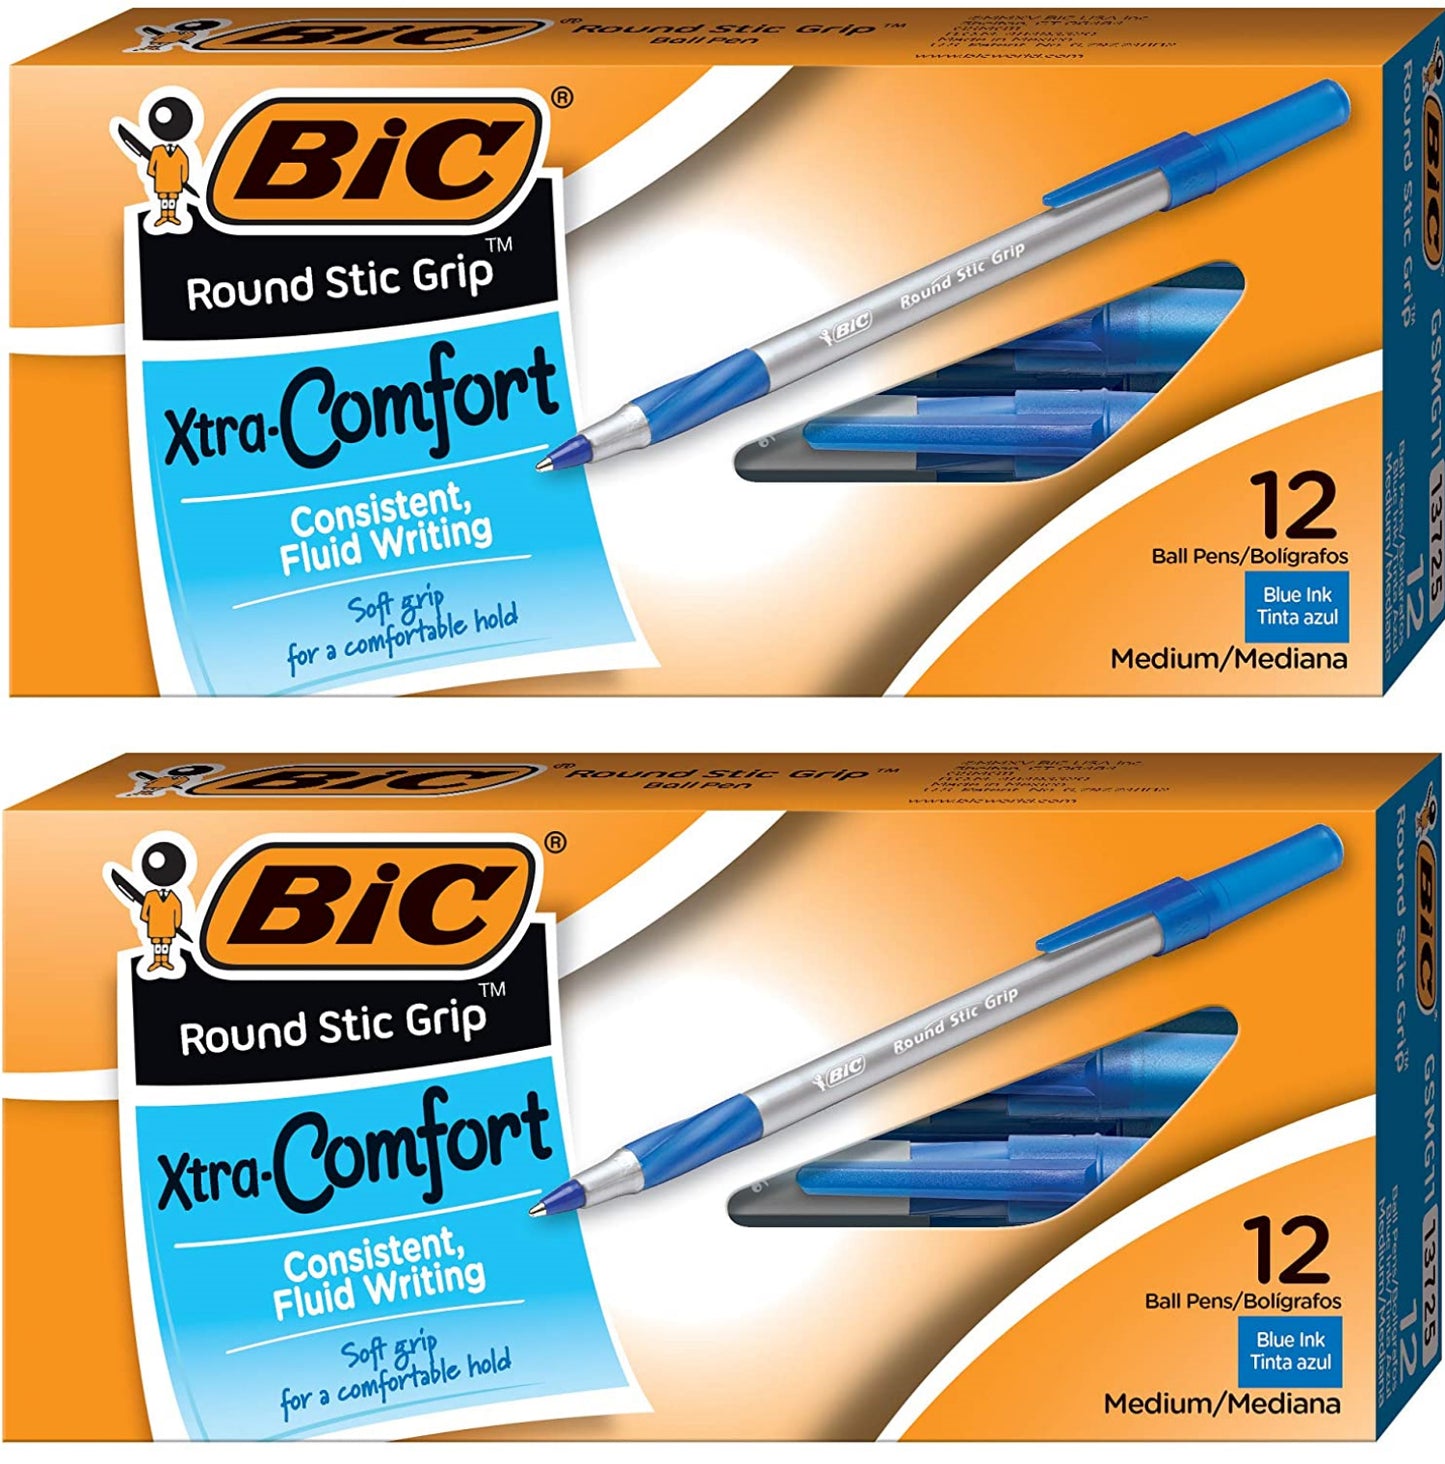 BIC Round Stic Grip Xtra Comfort Ballpoint Pen, Medium Point (1.2mm), 24-Count Blue - Pack of 2